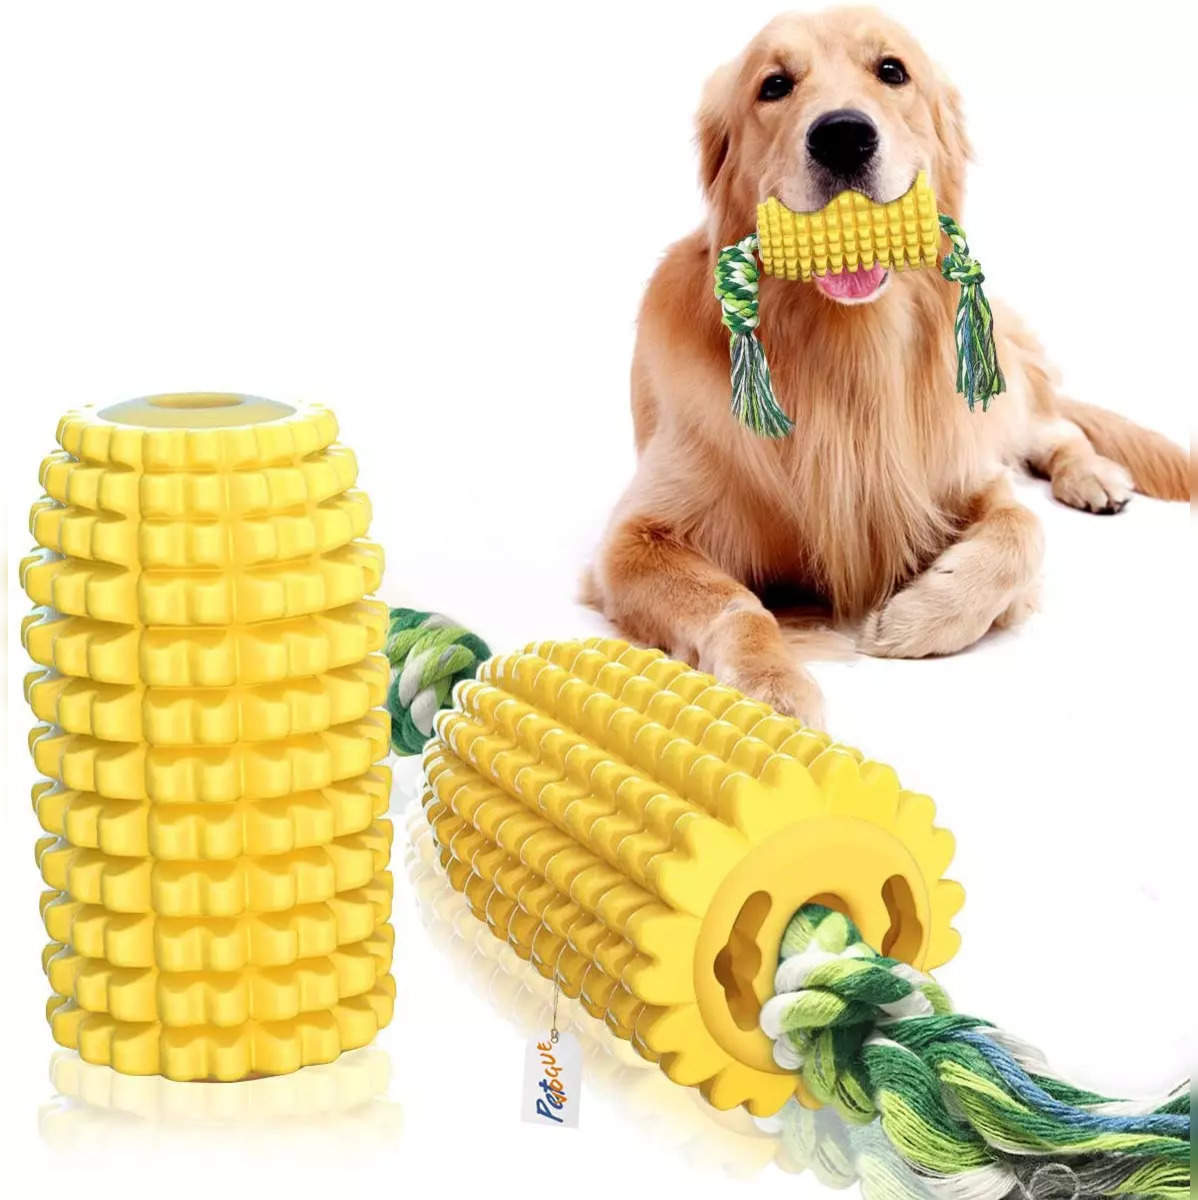 Dog Chew Toys, Puppy Toothbrush Clean Teeth Interactive Corn Toys